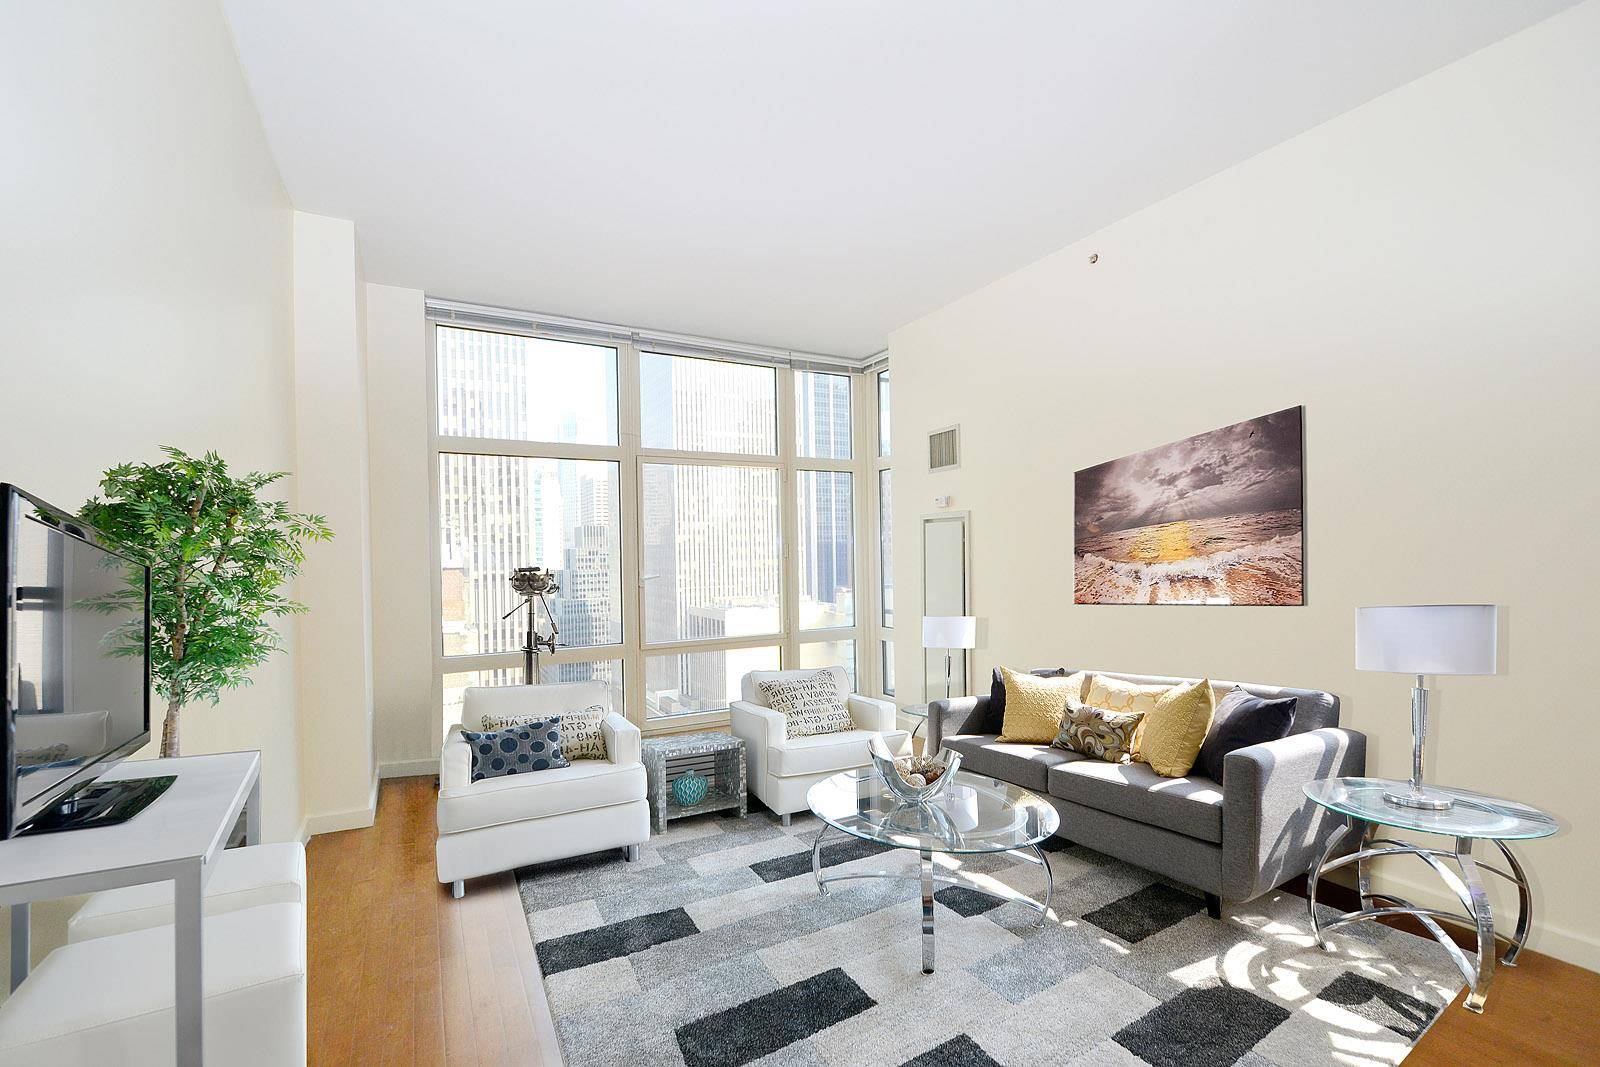 1 b rm w home office amp ; balcony rare and unique residential opportunity at the gateway to time square and rockefeller center, in the heart of new york city.